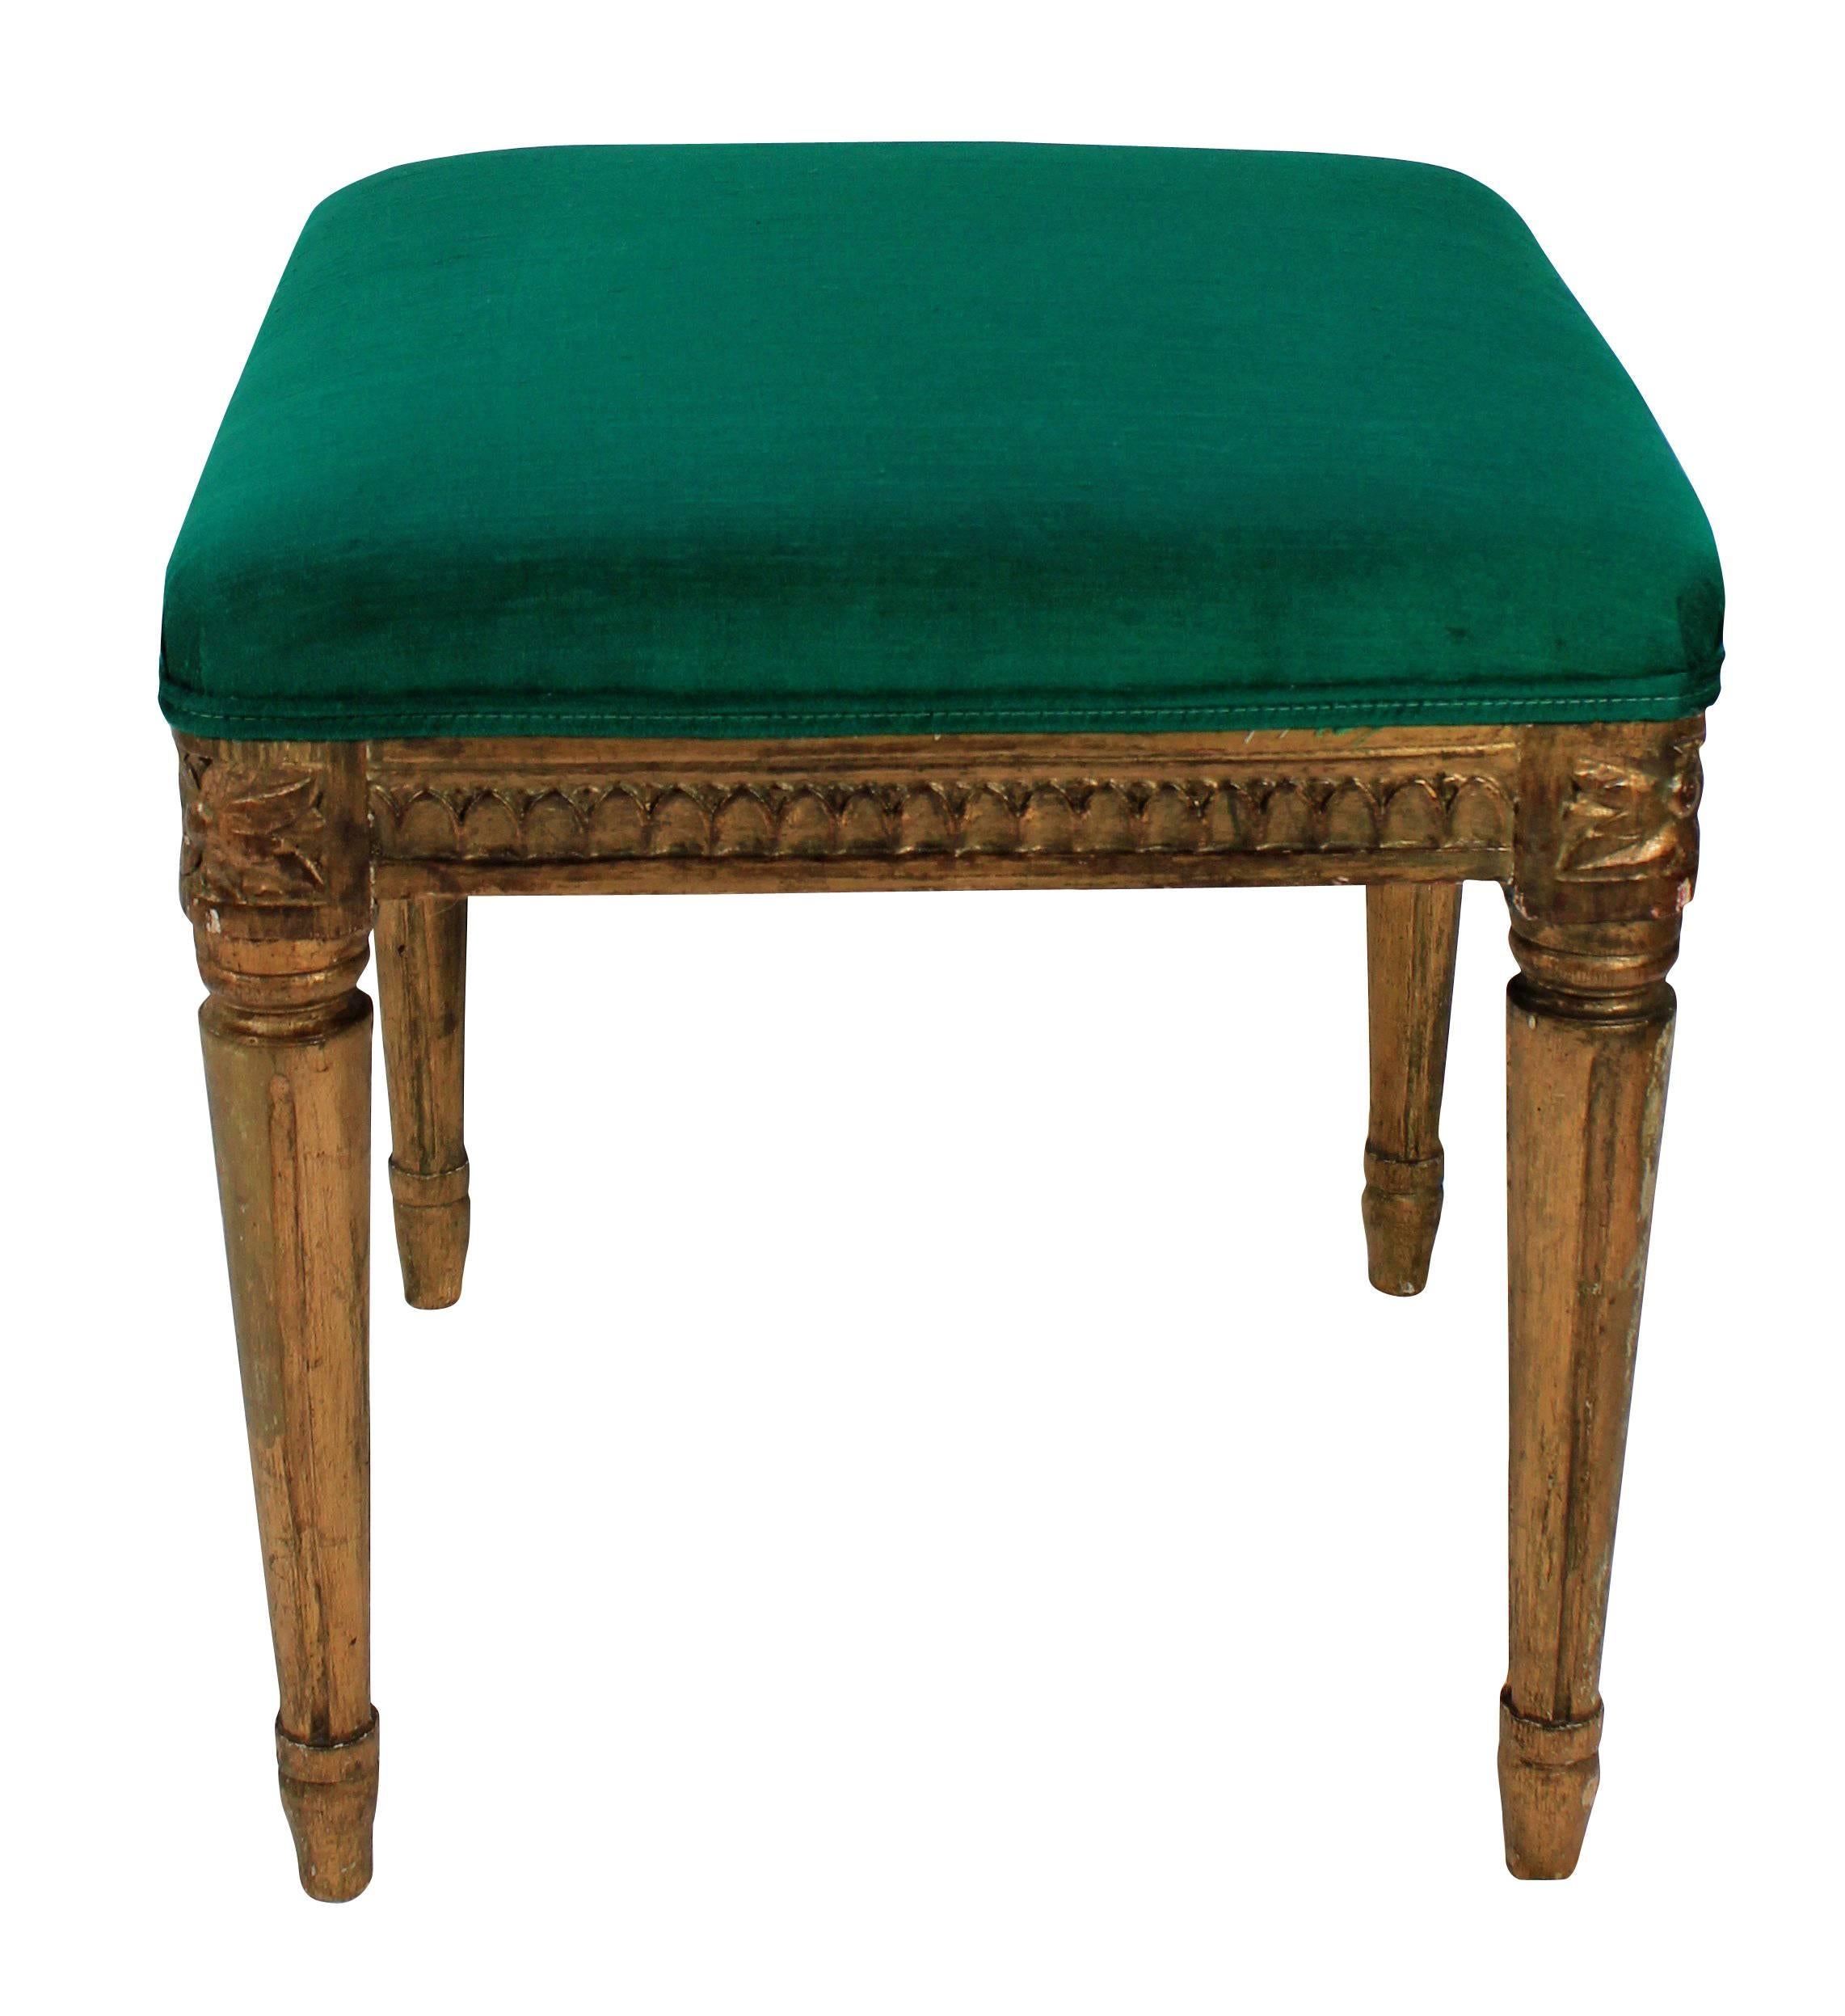 A Swedish giltwood stool, upholstered in emerald silk.